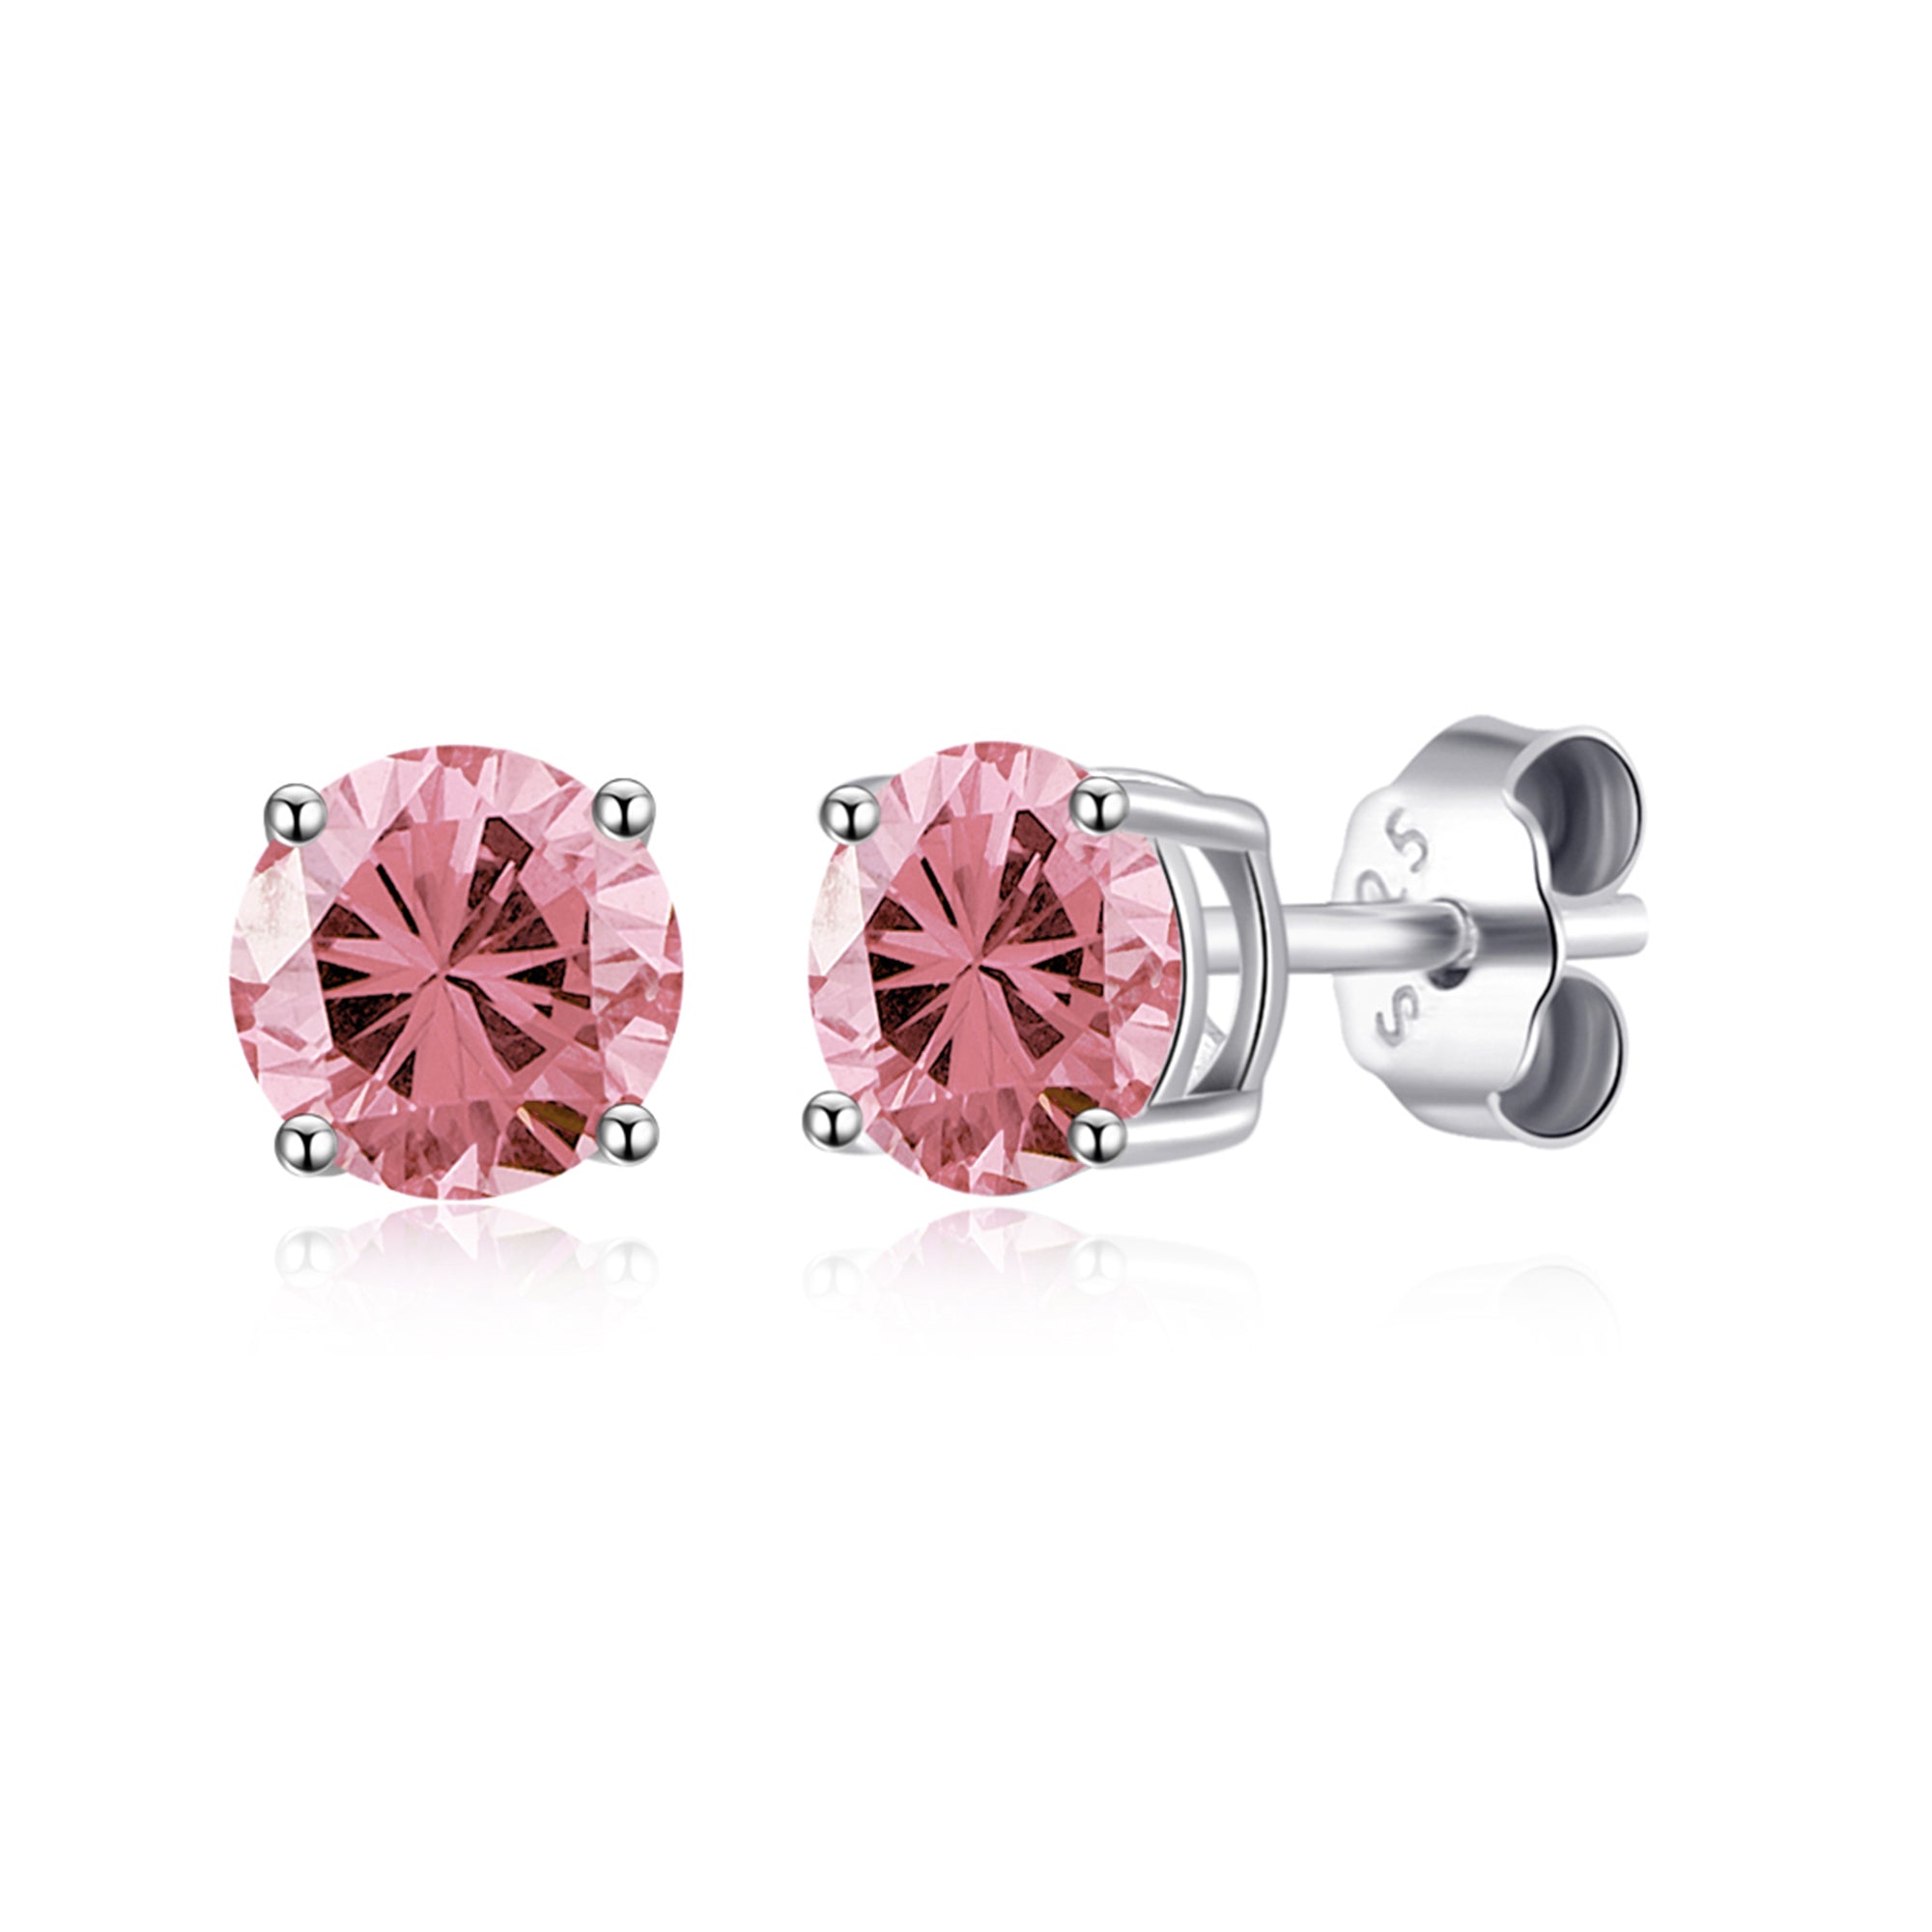 Sterling Silver October (Tourmaline) Birthstone Earrings Created with Zircondia® Crystals by Philip Jones Jewellery